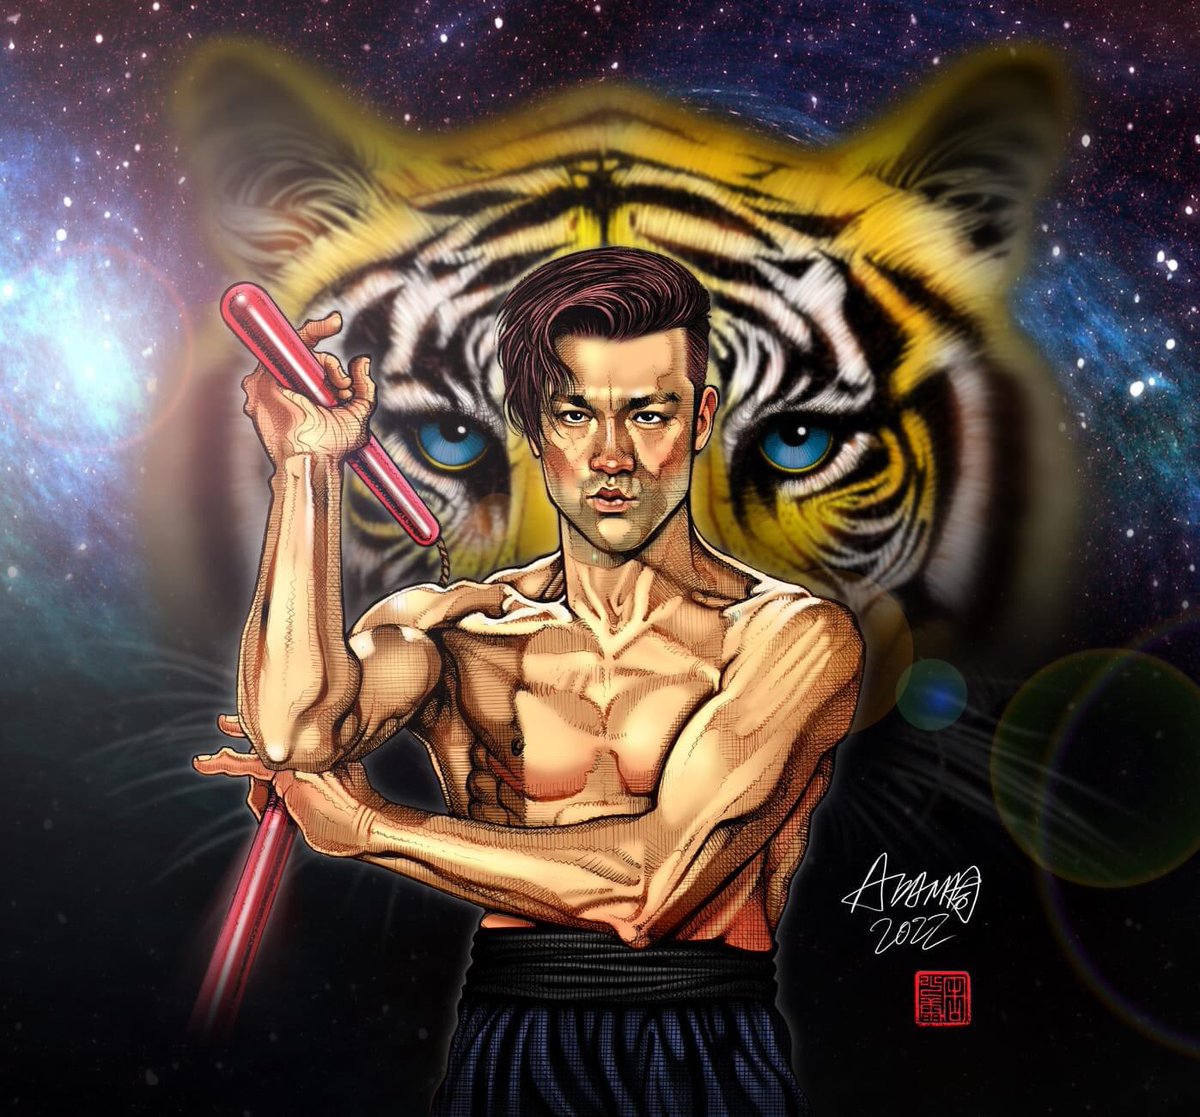 💛🧡🌞🧡💛 Bruce Lee ...The Year of The Water Tiger 2022! Art🎨by the incredible Adam Chow! 
#chinesenewyear    #yearofthetiger   #AdamChowArt🎨 #brucelee🐲 #YearoftheTiger2022🐯#BruceLeeTheDragon🐉#YearofTheWaterTiger🌊🐯